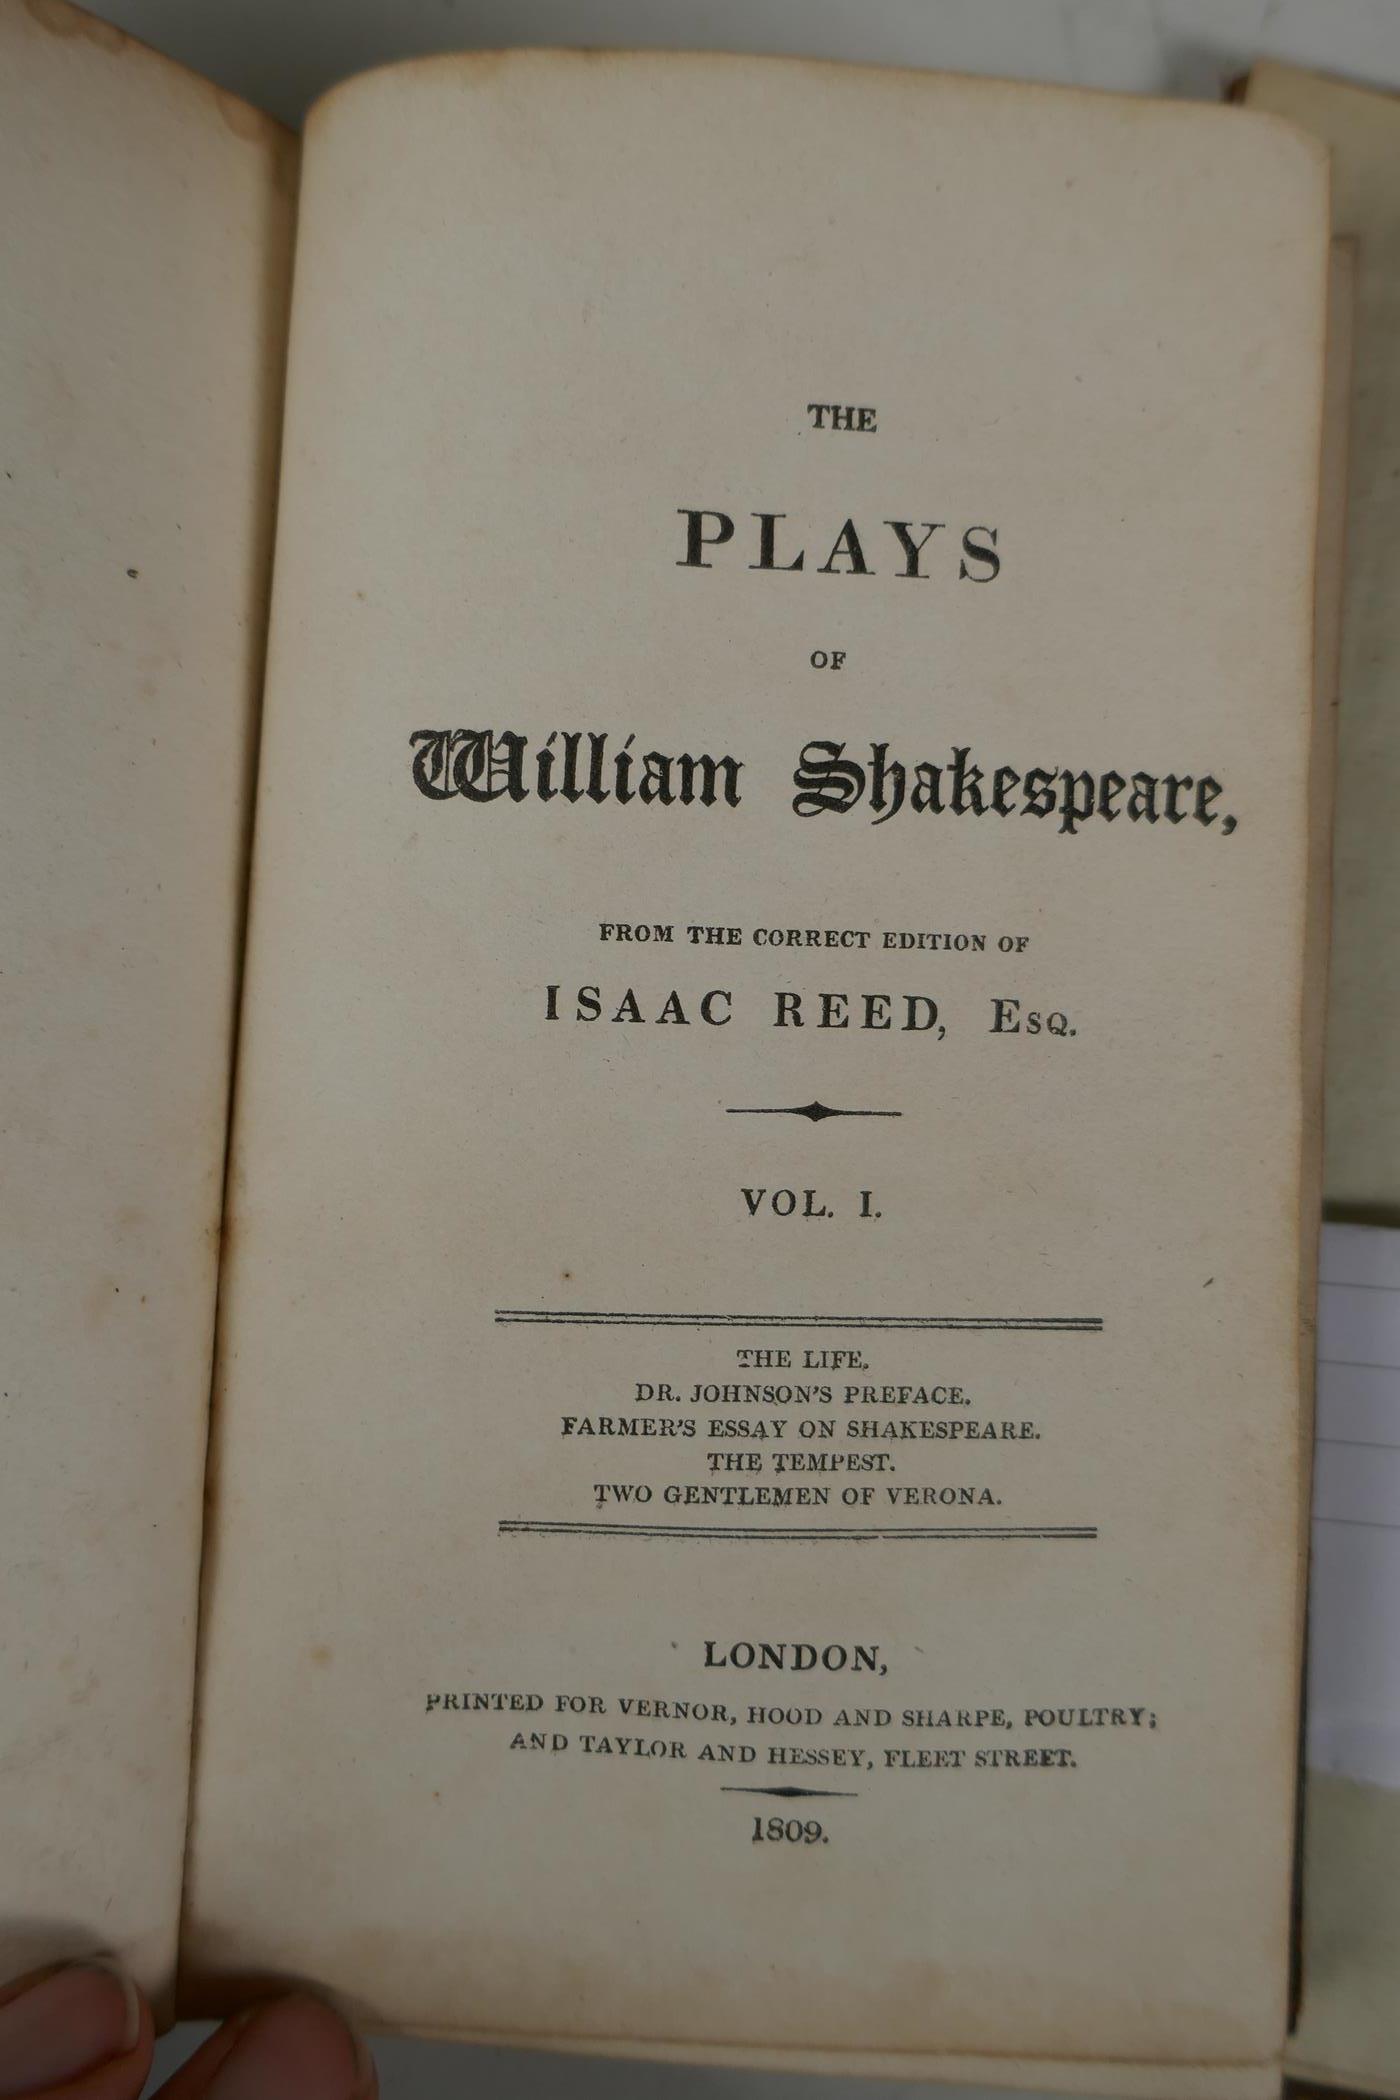 The Dramatic works of William Shakespeare, stereotype edition, Vol 1-12, early C19th leather bound - Image 7 of 9